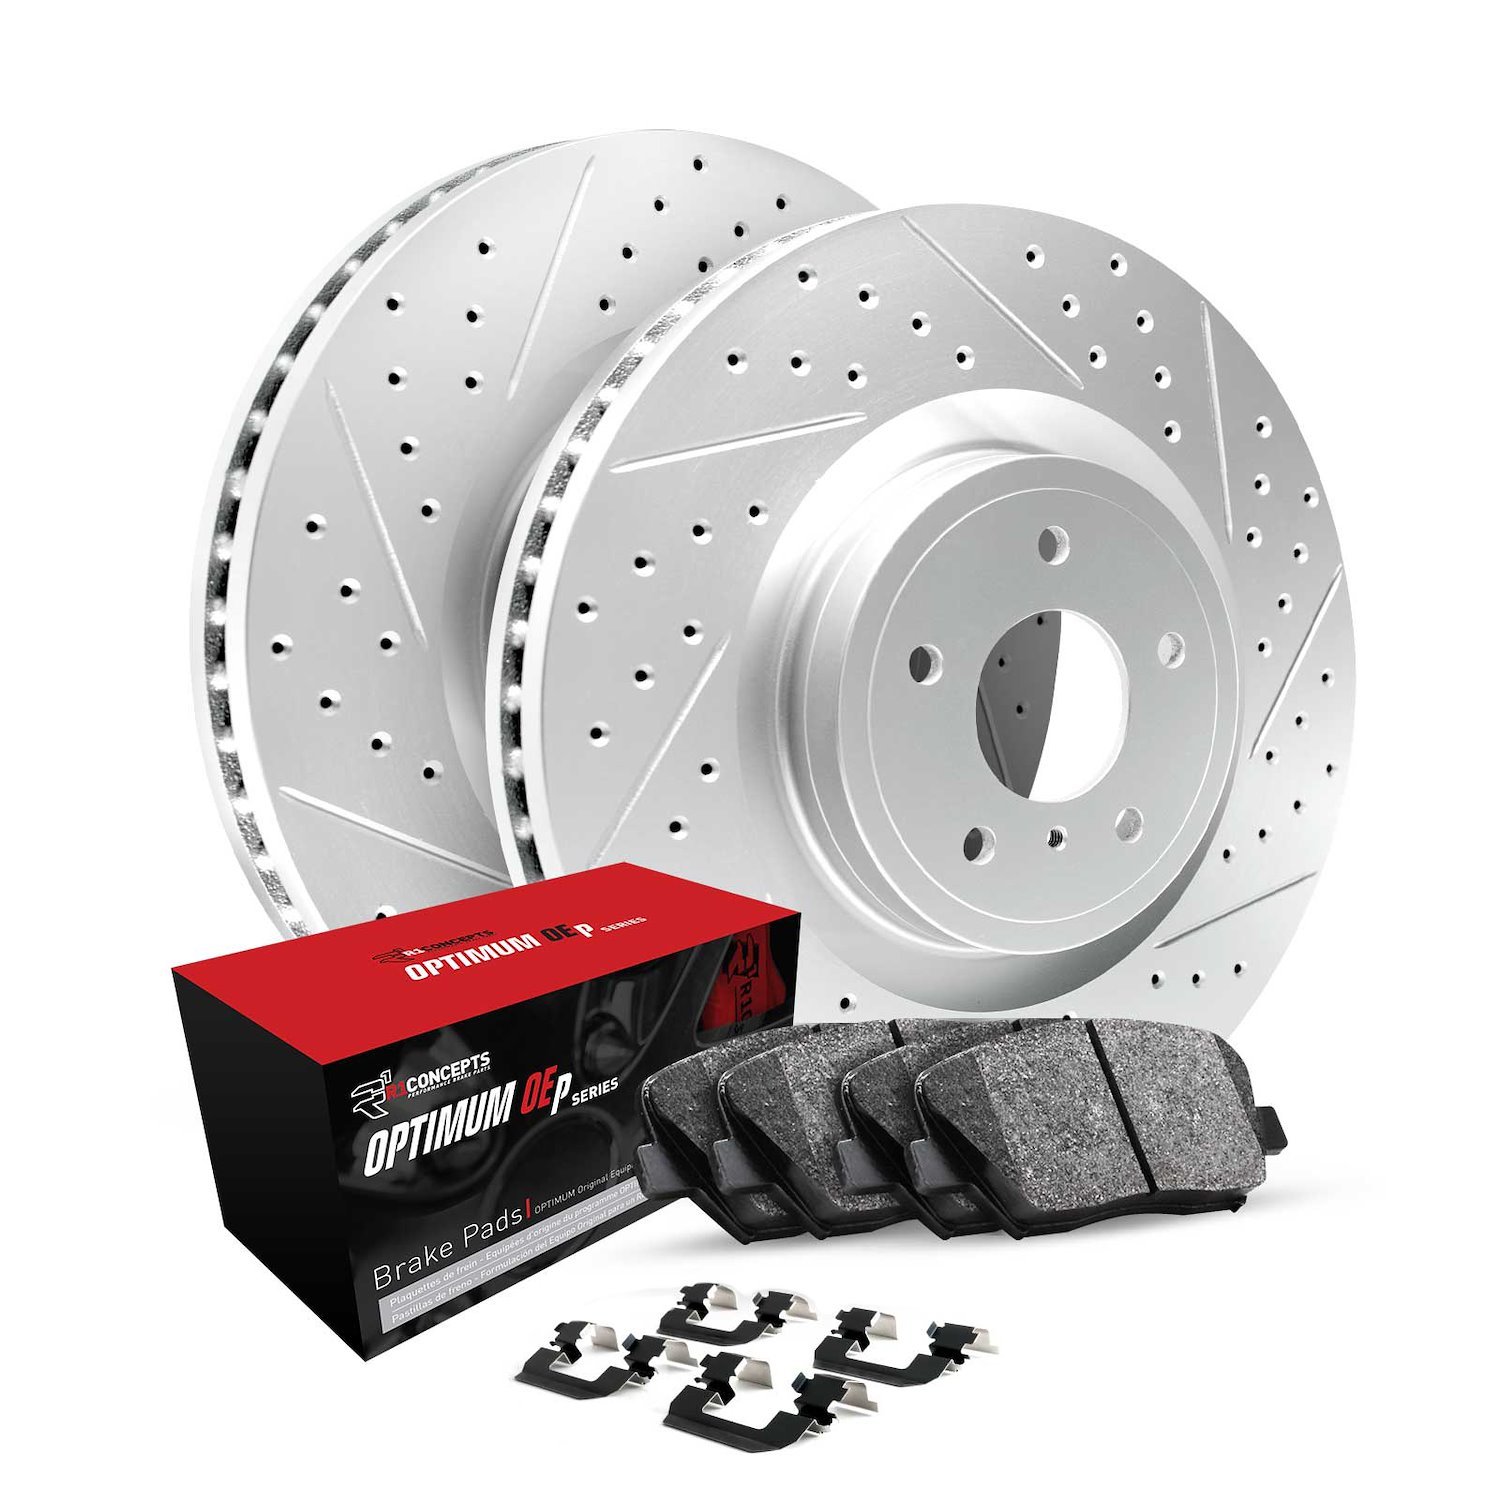 GEO-Carbon Drilled/Slotted Rotors w/Optimum OE Pads/Hardware, 1991-2004 Fits Multiple Makes/Models, Position: Front